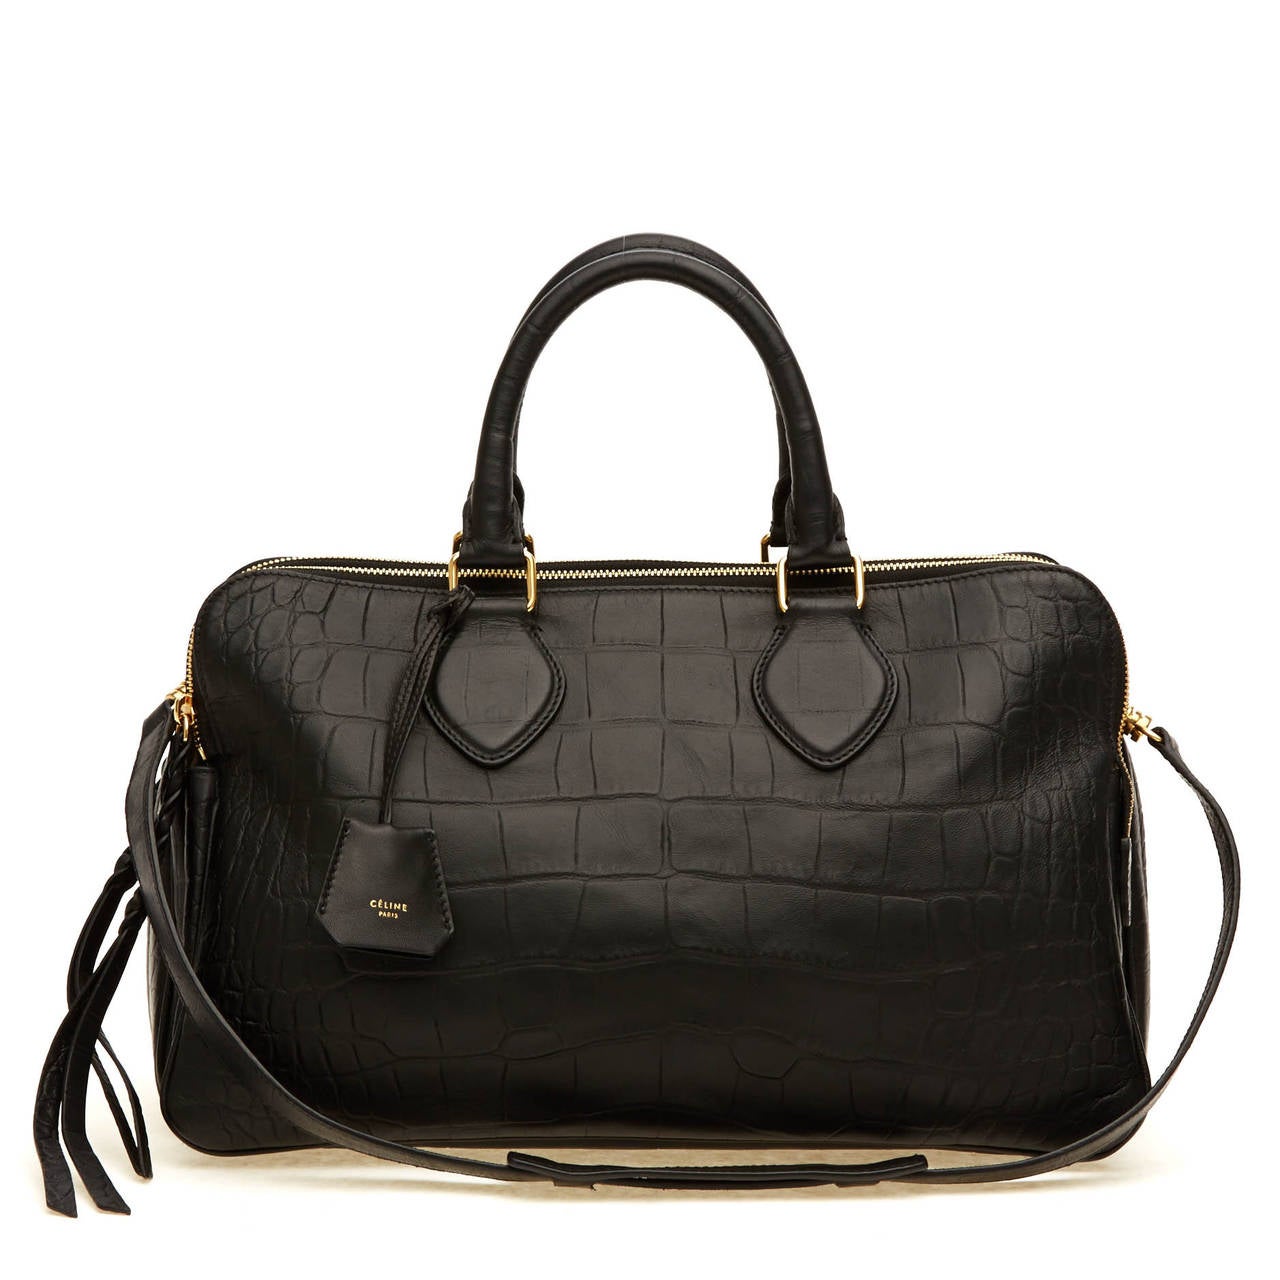 This authentic, striking Celine Triptyque Embossed Crocodile Vertical Bag is featured in black, and accented with gold tone hardware. This beautiful bag has several compartments, and is divided into three main zipped slots. The detachable leather